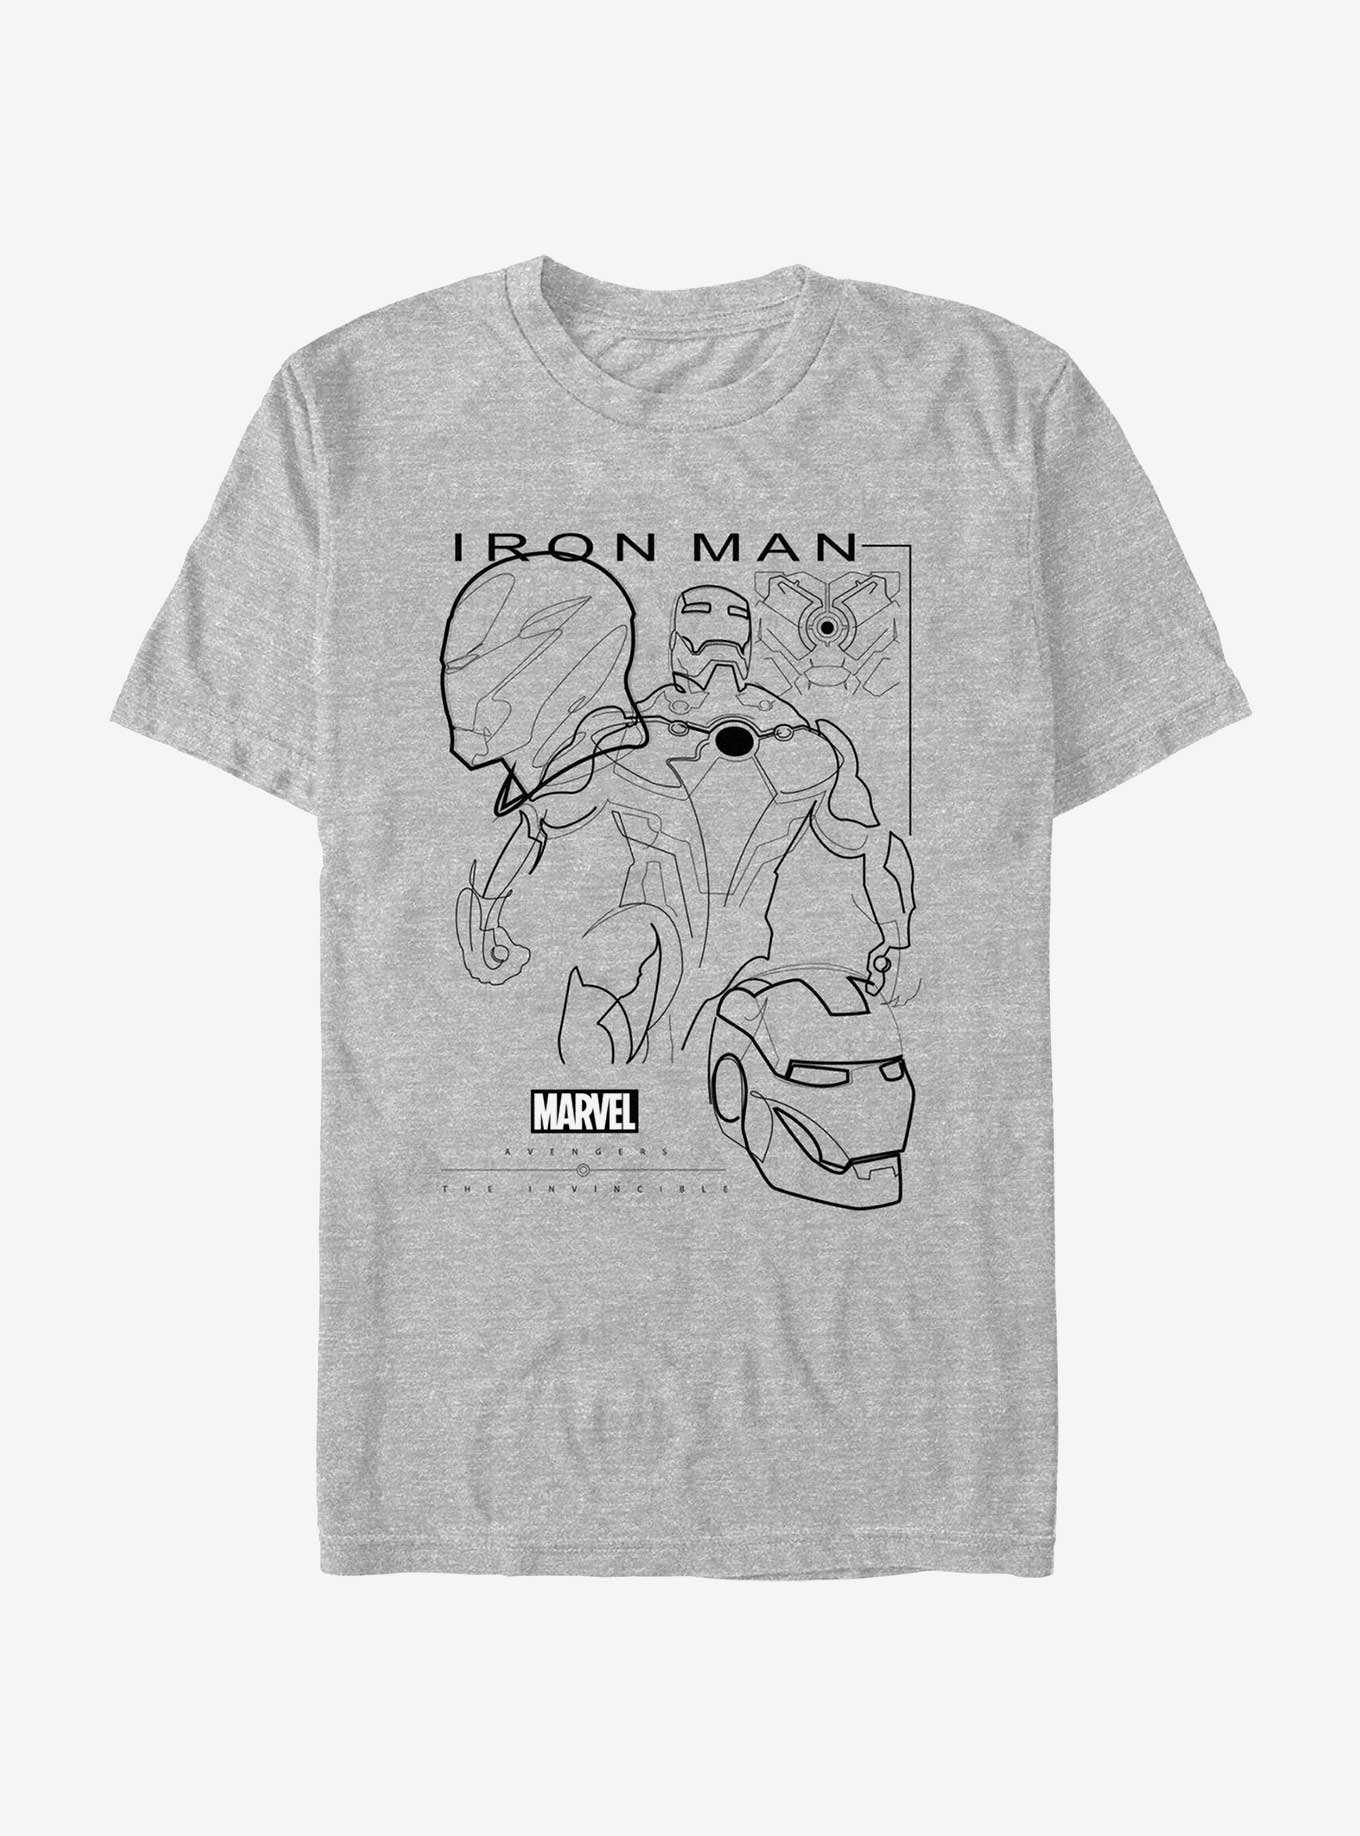 OFFICIAL Iron Man T-Shirts & Merchandise | Hot Topic